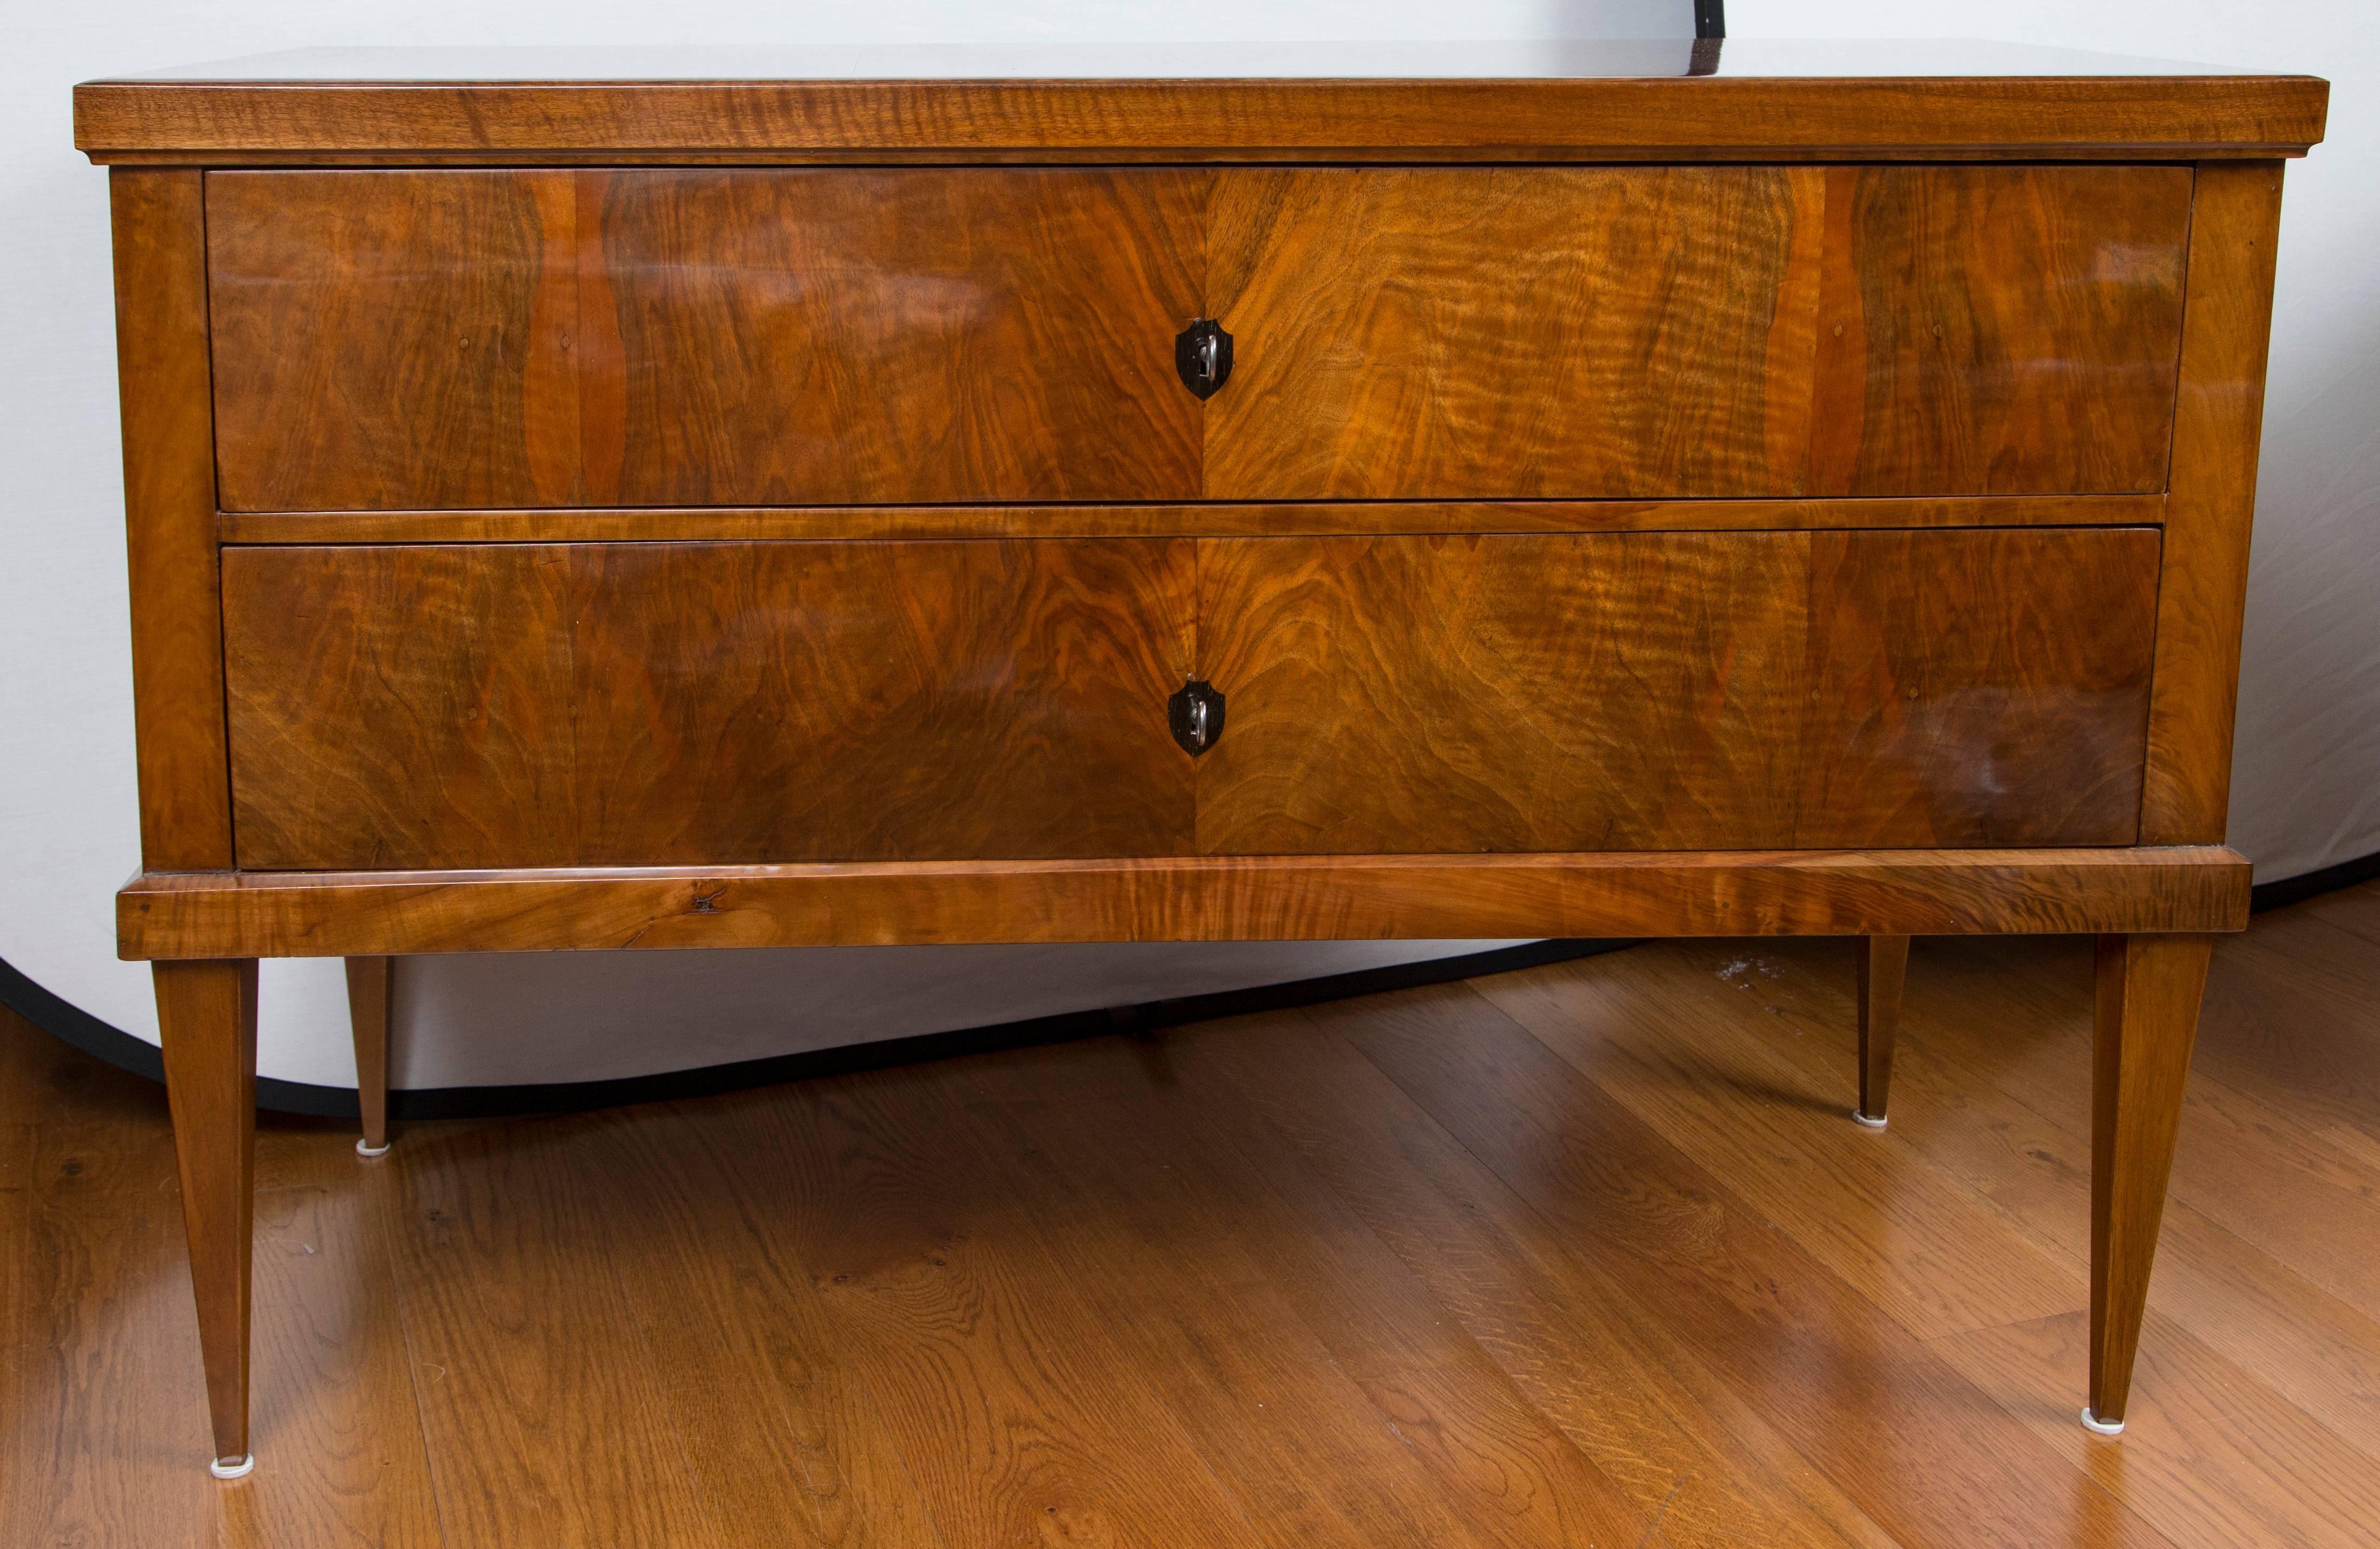 Large Biedermeier chest in a darker walnut veneer on pine, comprised of two long drawers on high straight and tapered legs, adorned with inlaid shield-shaped escutcheons.
Date: circa 1840.
Origin: Germany
Condition: Excellent, reconditioned and